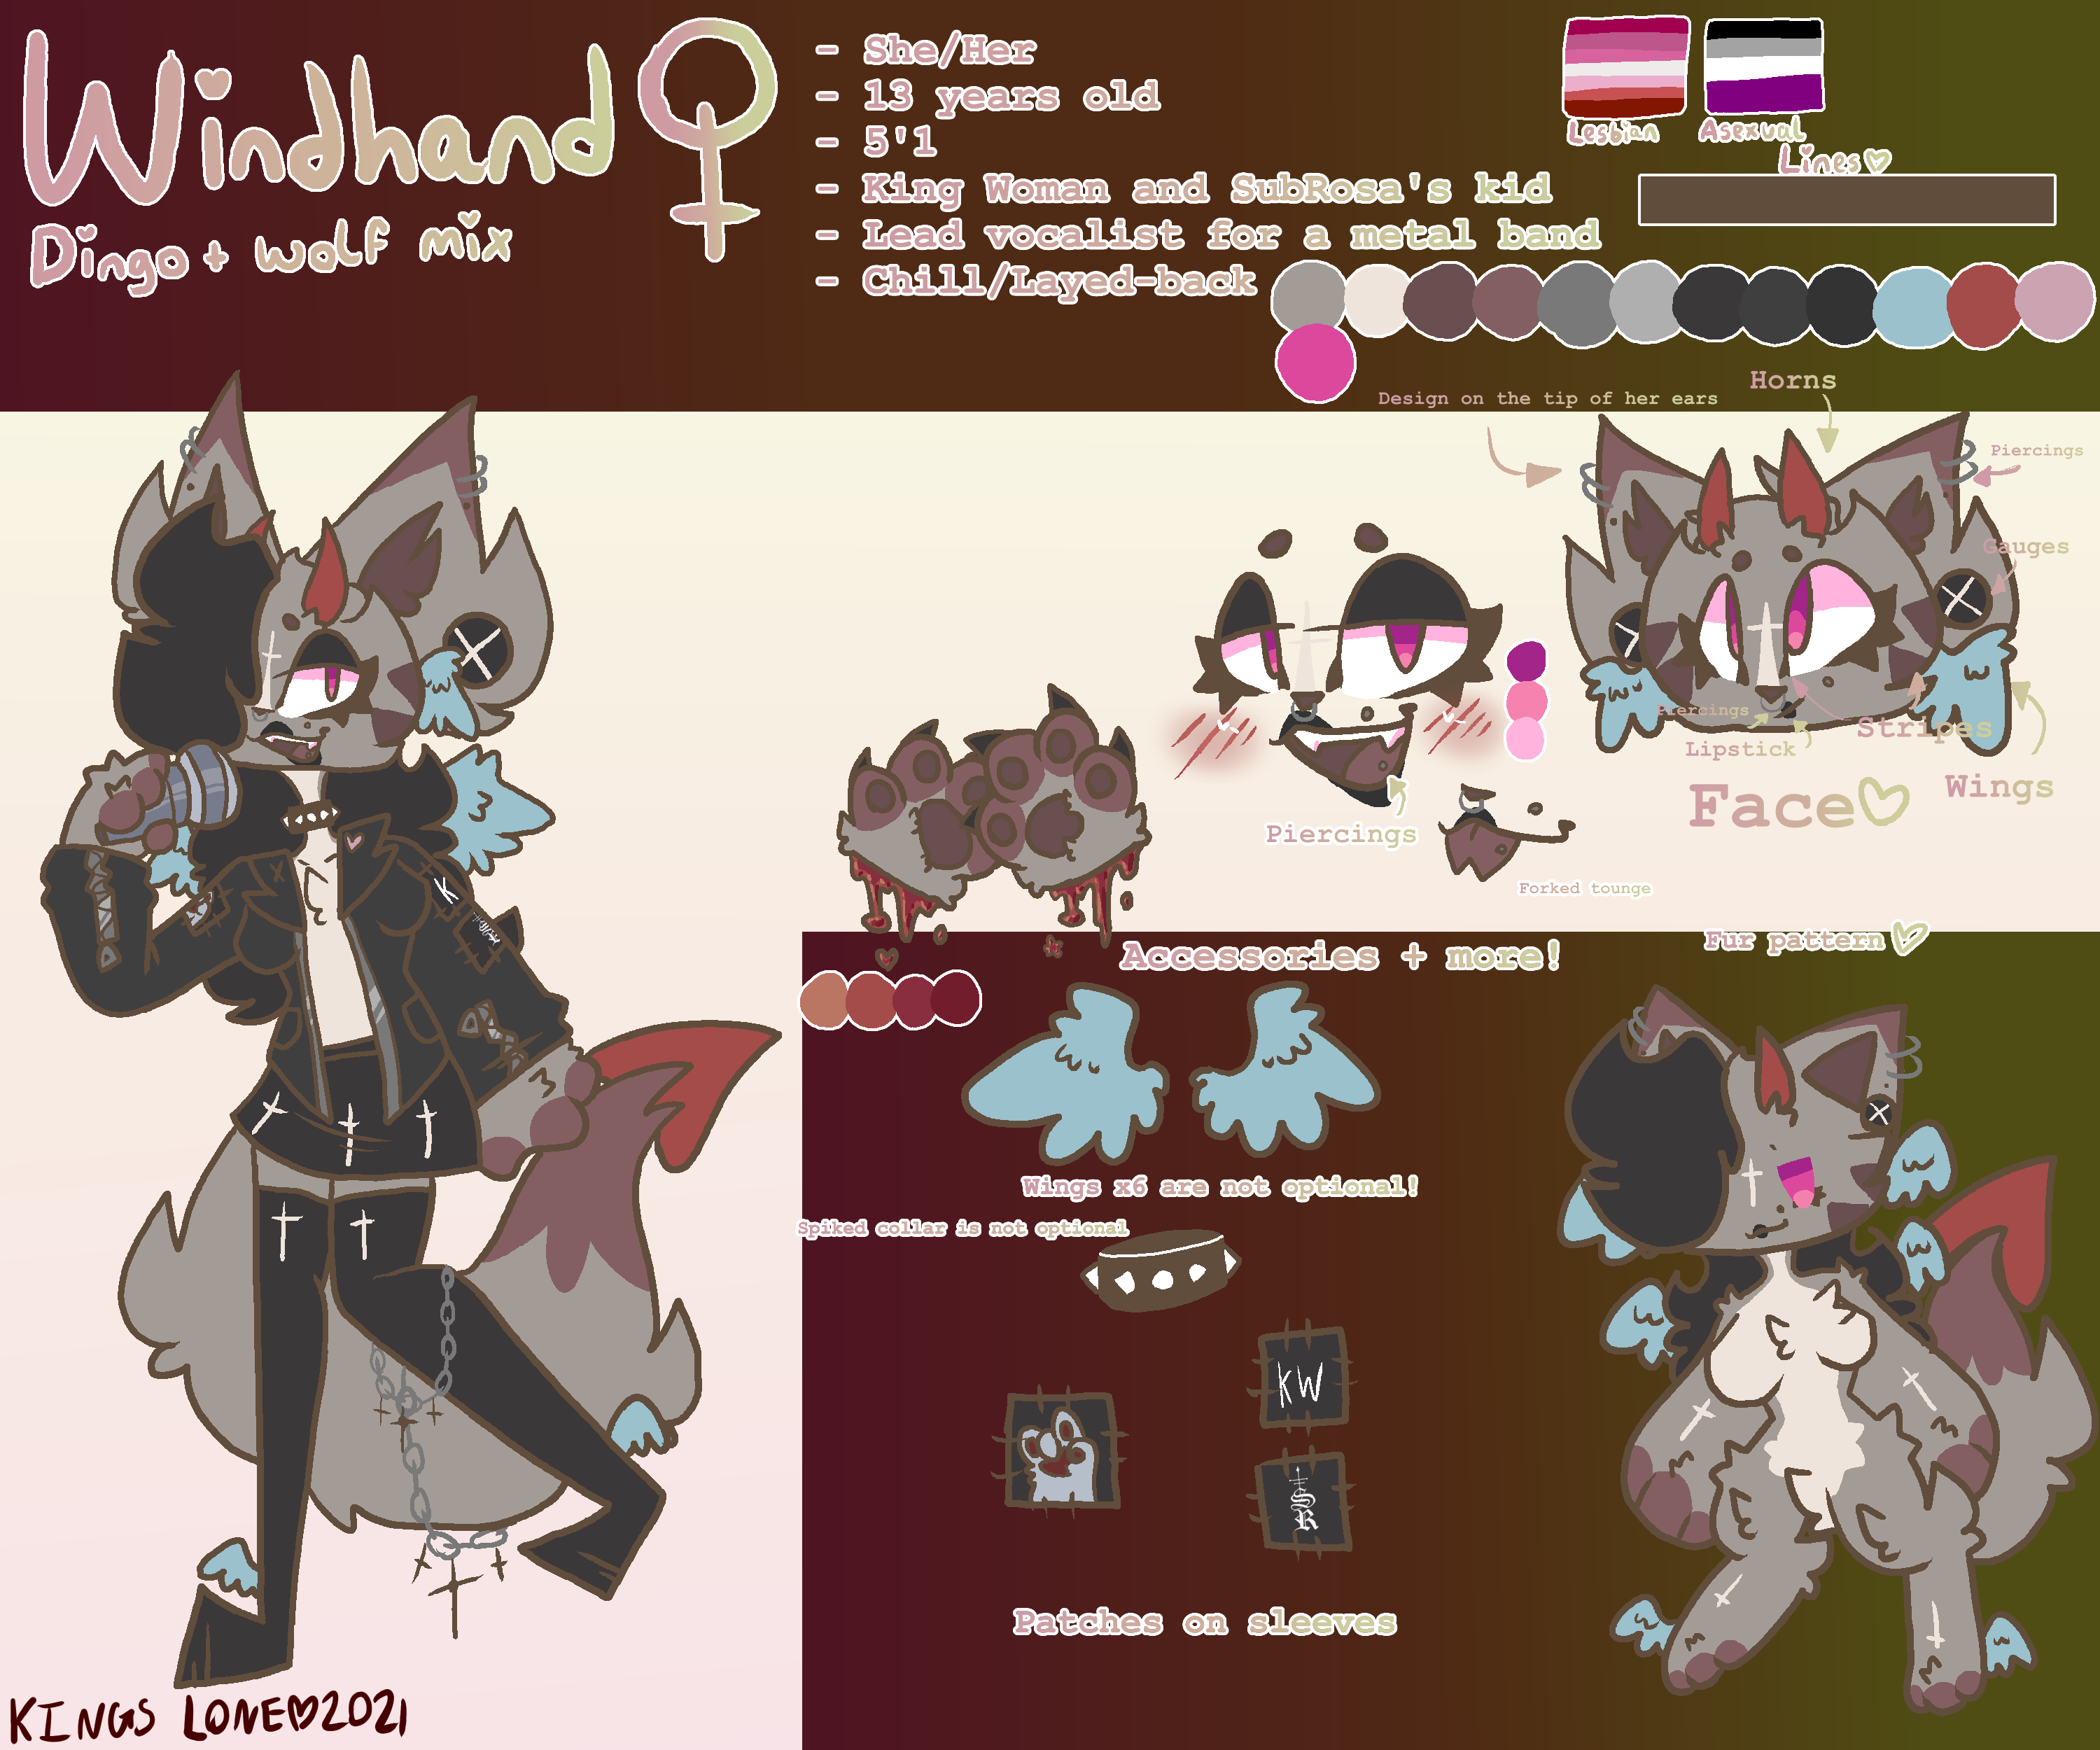 Windhand%20Ref.png